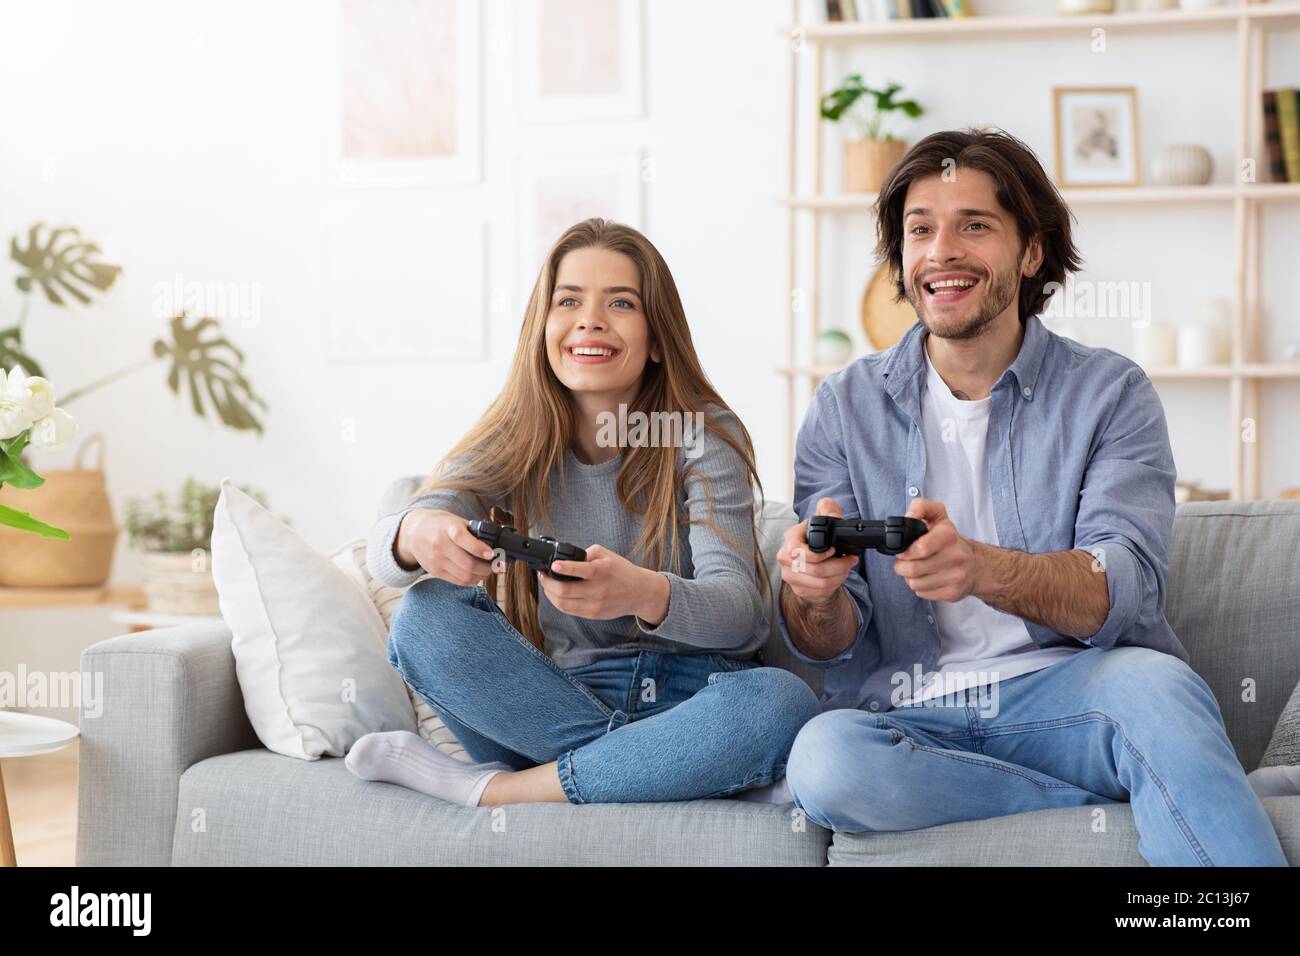 Excited funny couple playing video games at home Stock Photo